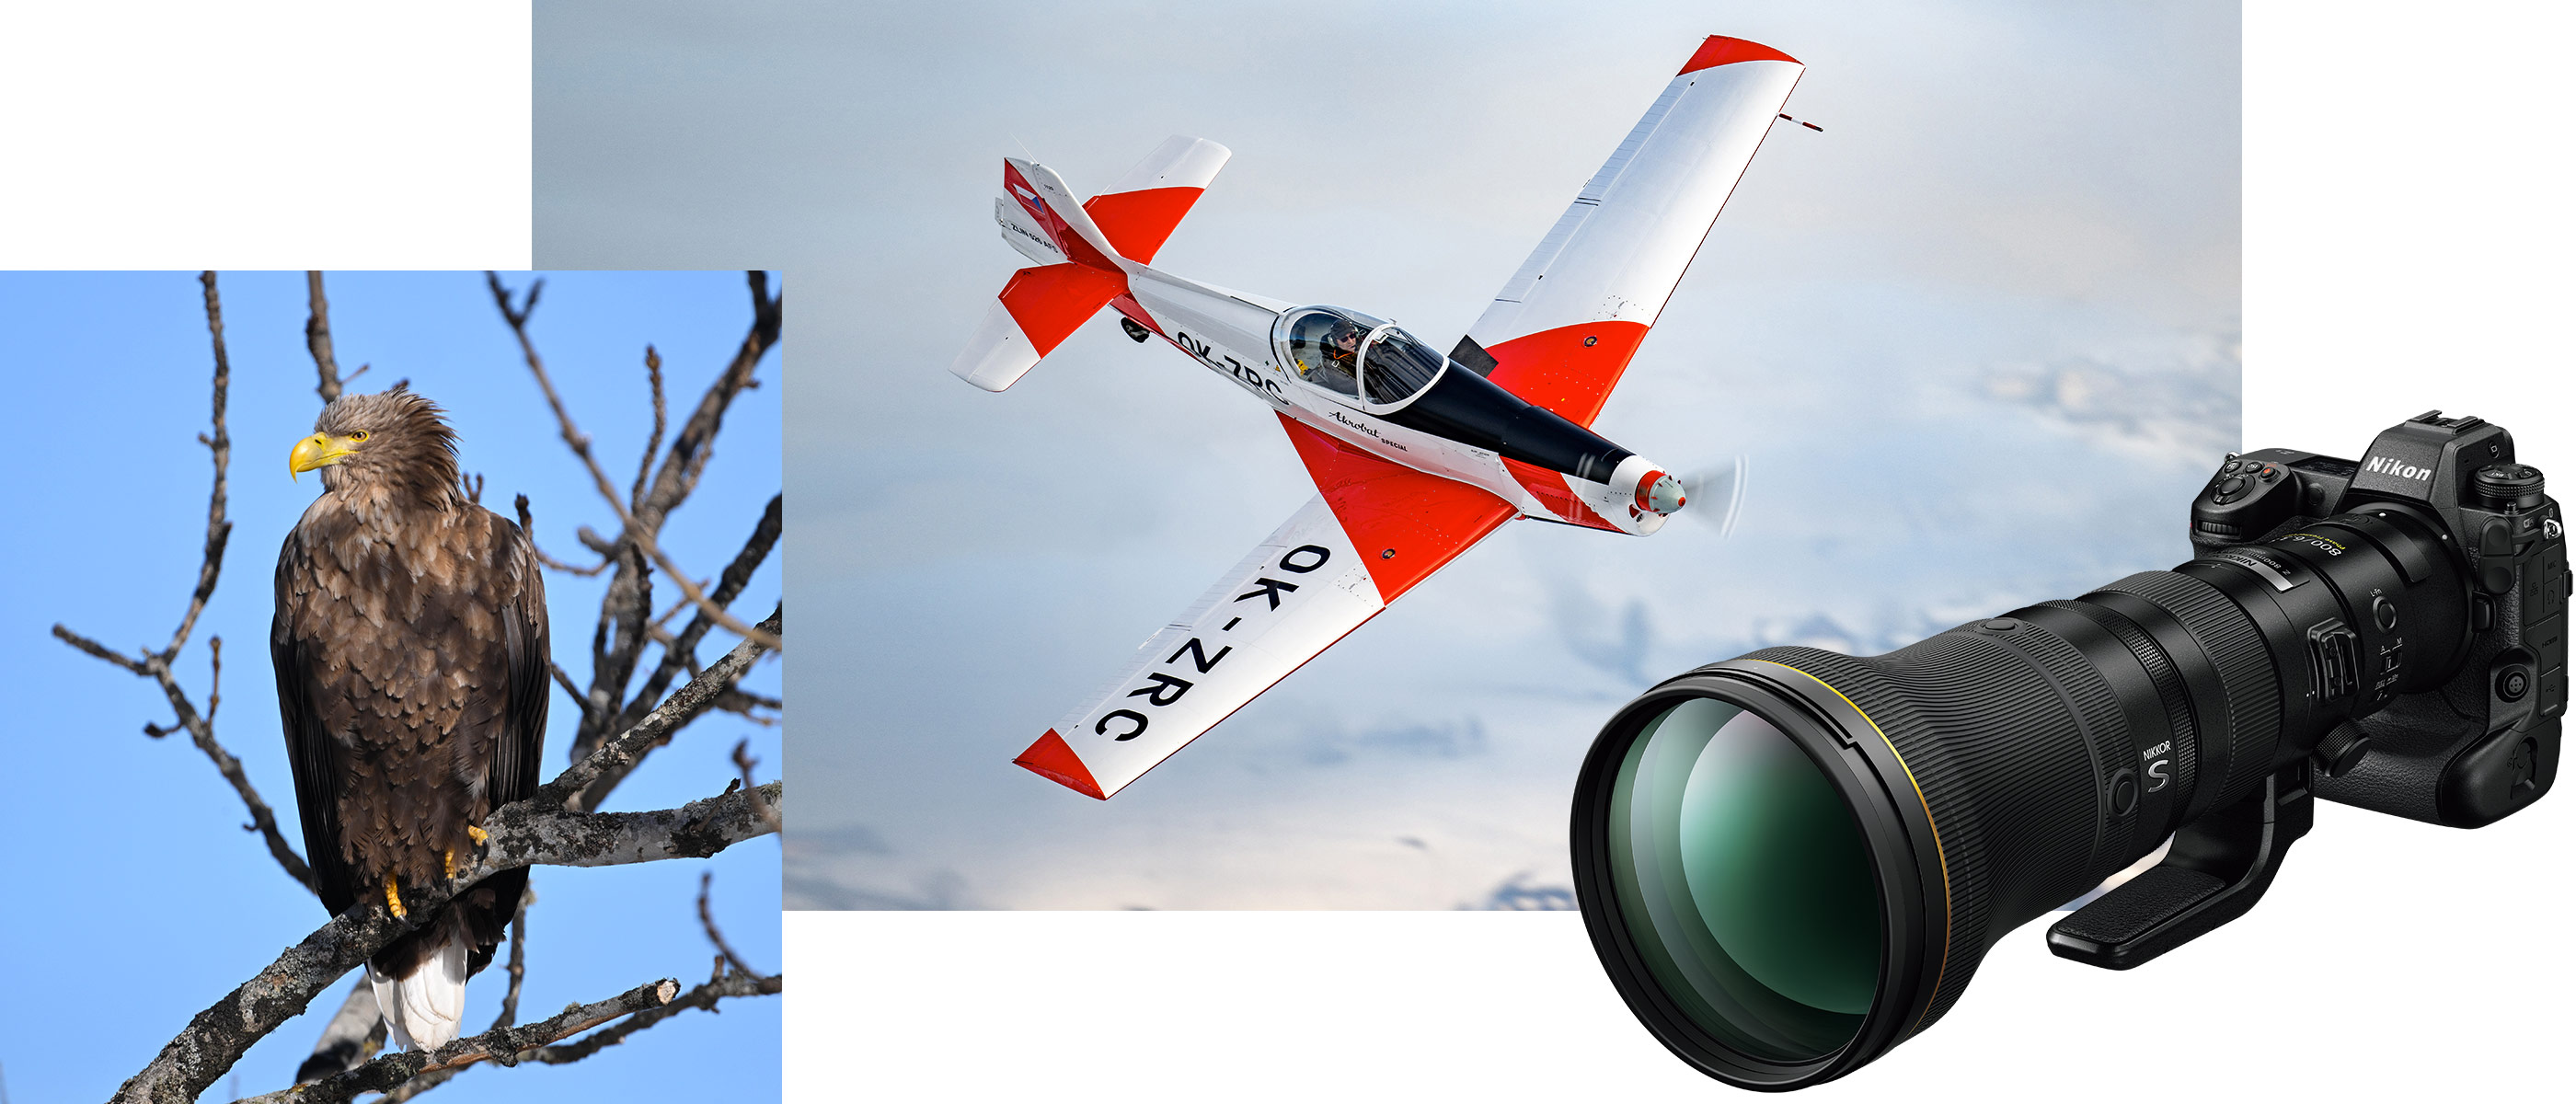 Collage of photos of a bird, plane and NIKKOR Z 800mm f/6.3 VR S lens on a Nikon camera body